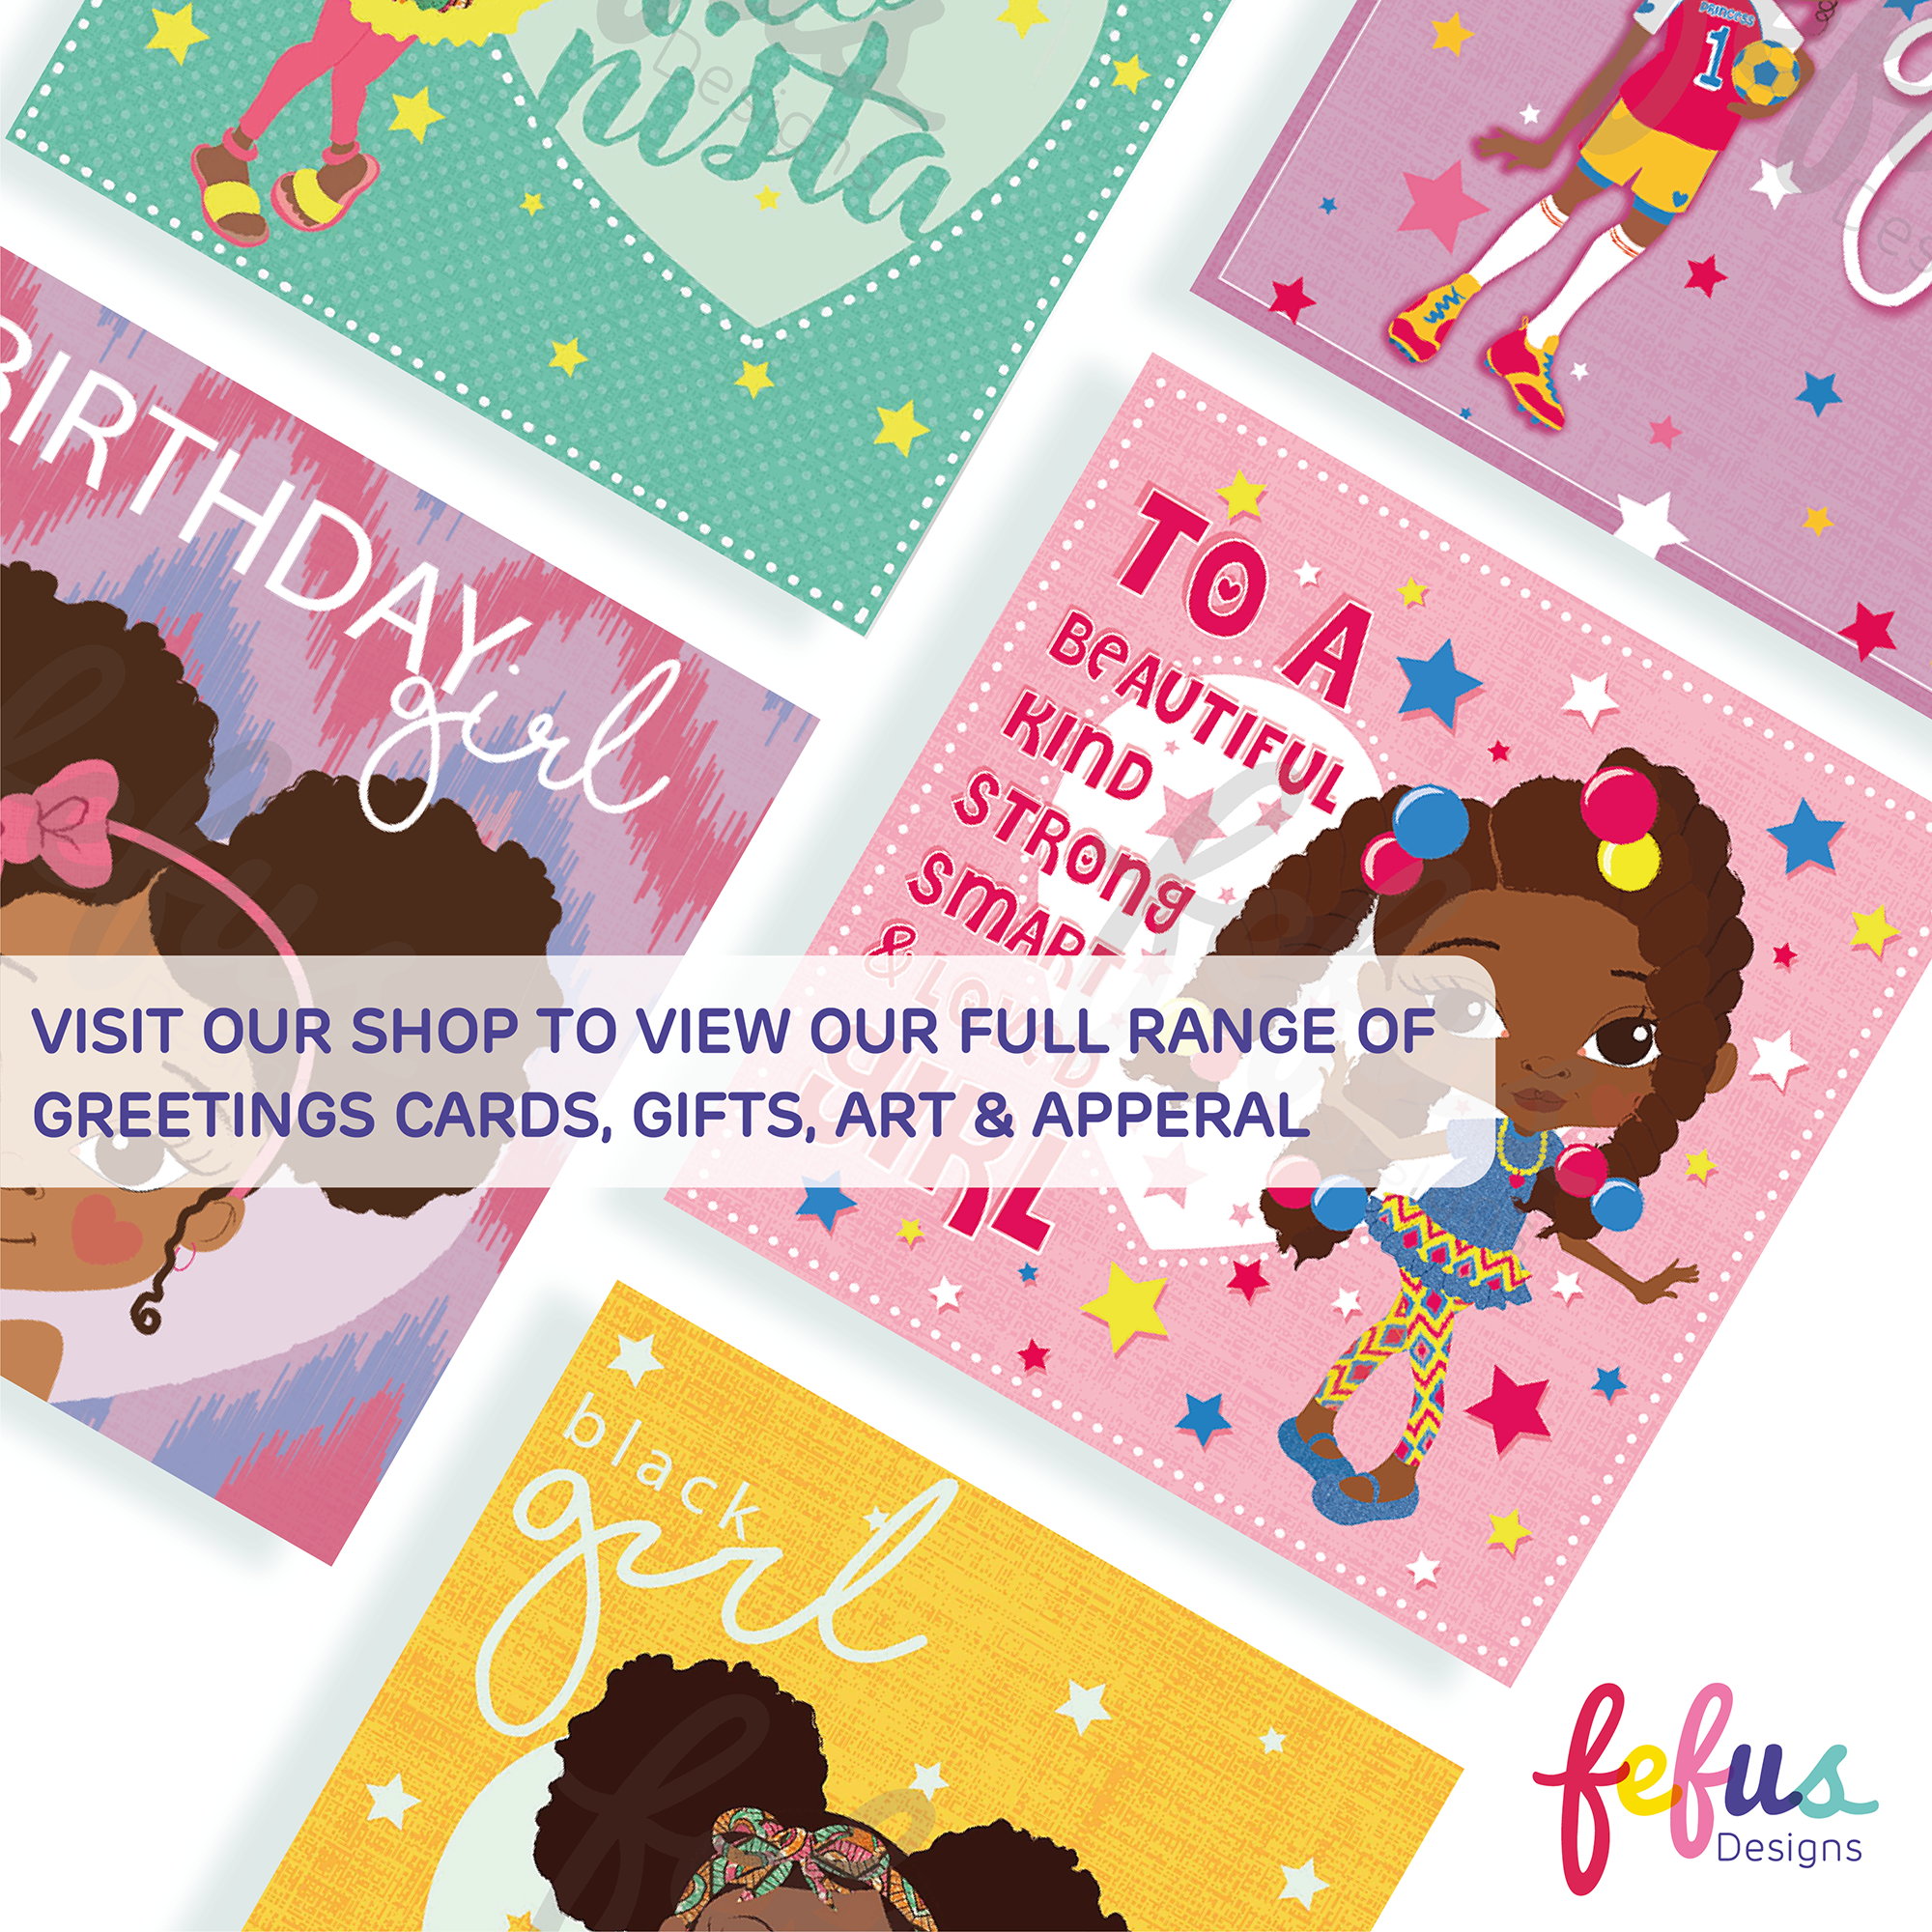 Third Birthday Afro Party Mixed Race Girl  - Brown Girl Birthday Card | Fefus Designs